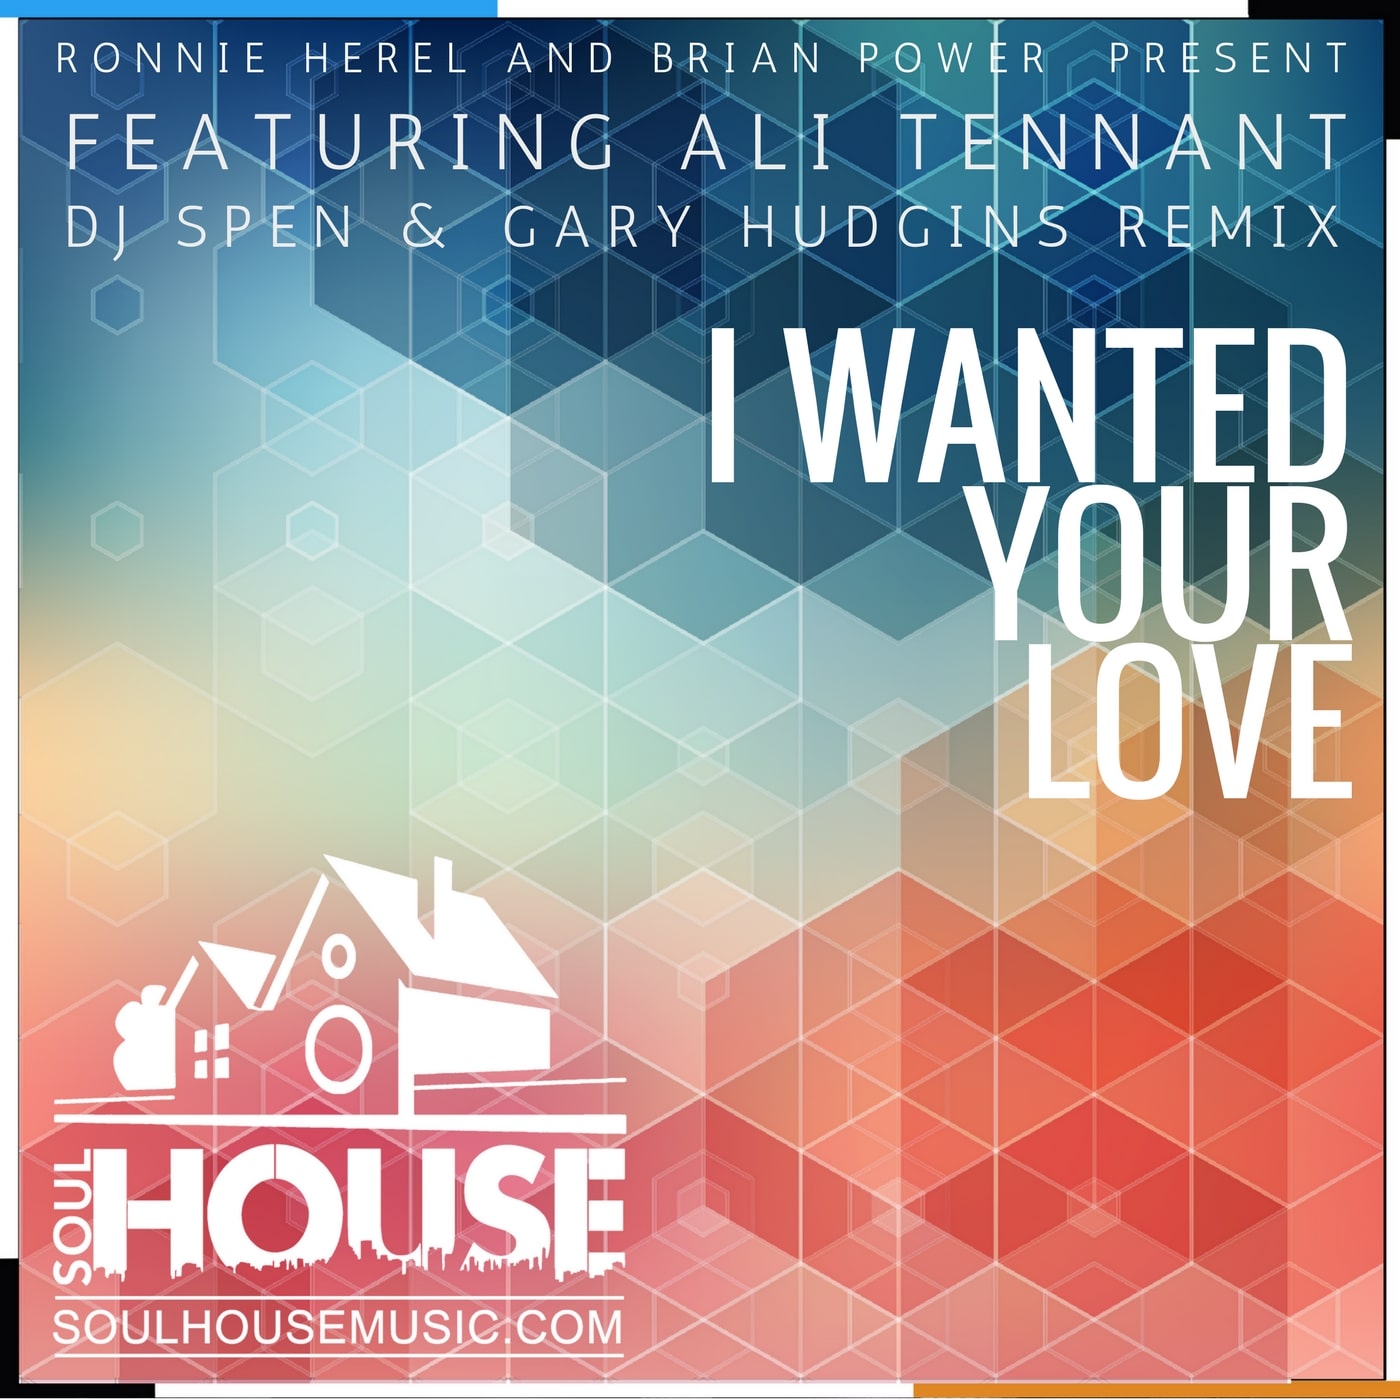 Ronnie Herel & Brian Power Present I Wanted Your Love (DJ Spen & Gary Hudgins Remix)